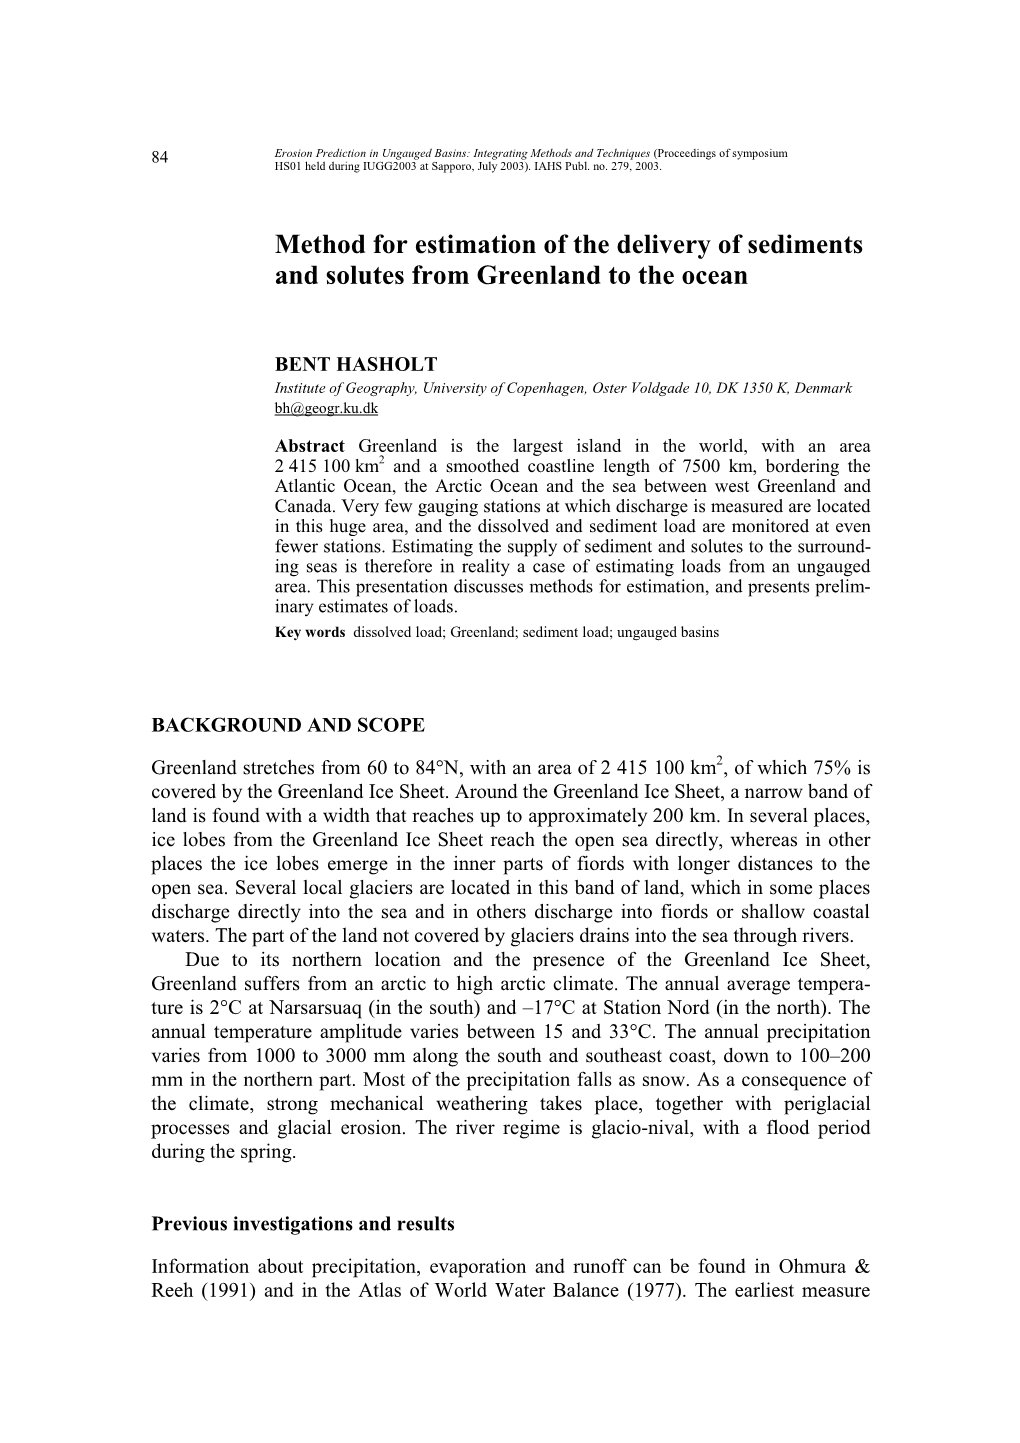 Method for Estimation of the Delivery of Sediments and Solutes from Greenland to the Ocean